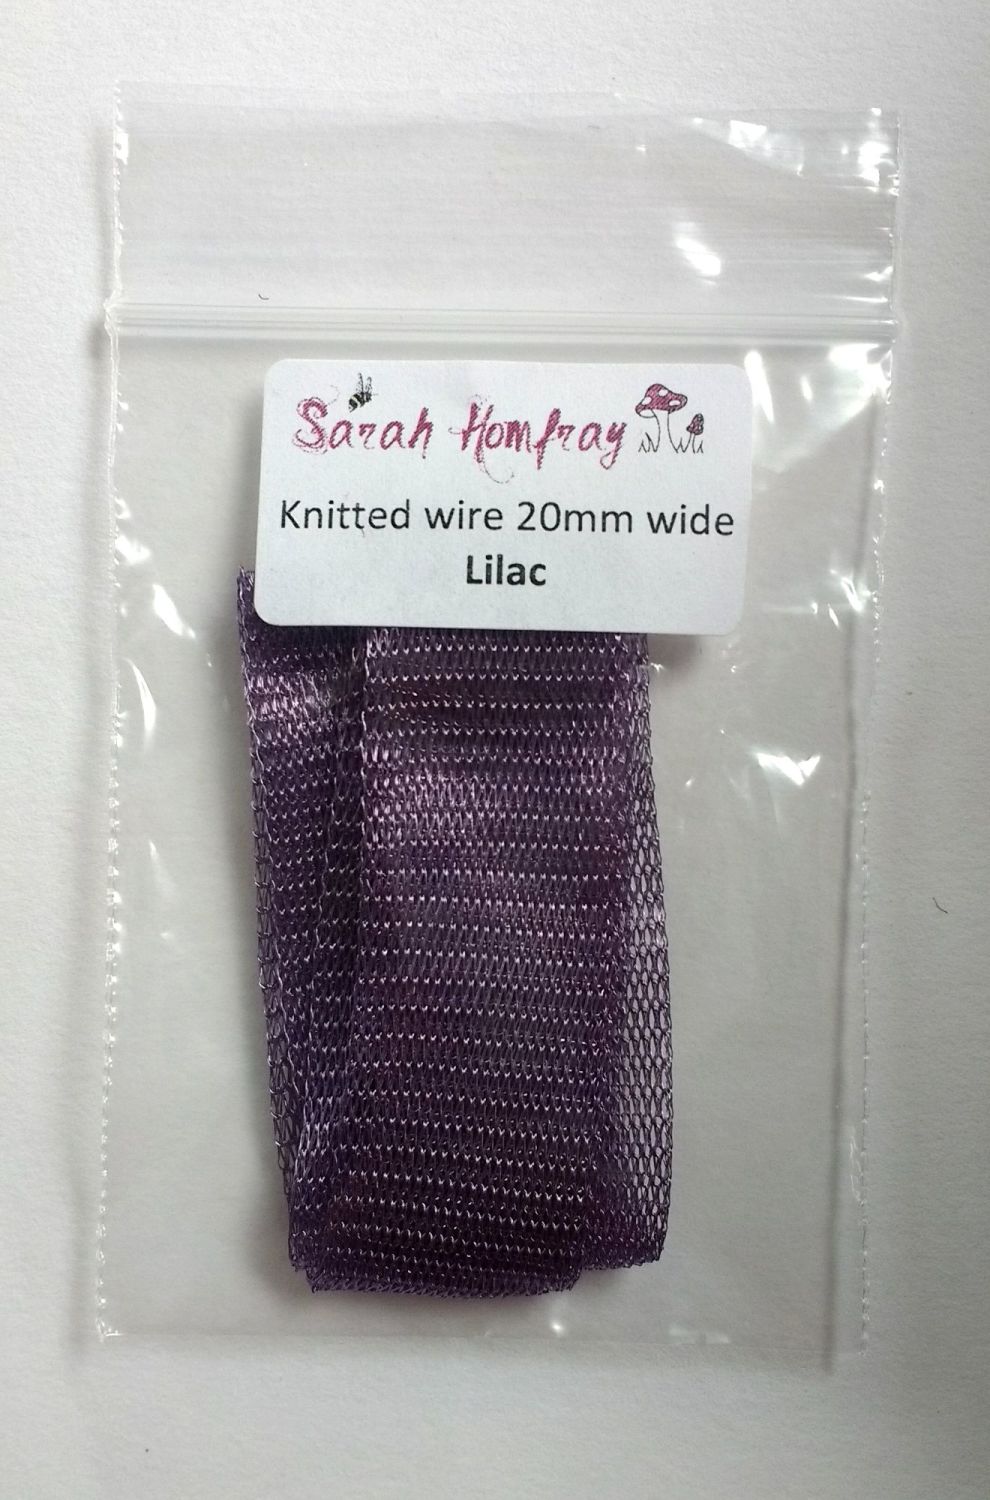 Knitted wire - 48cm length, Lilac